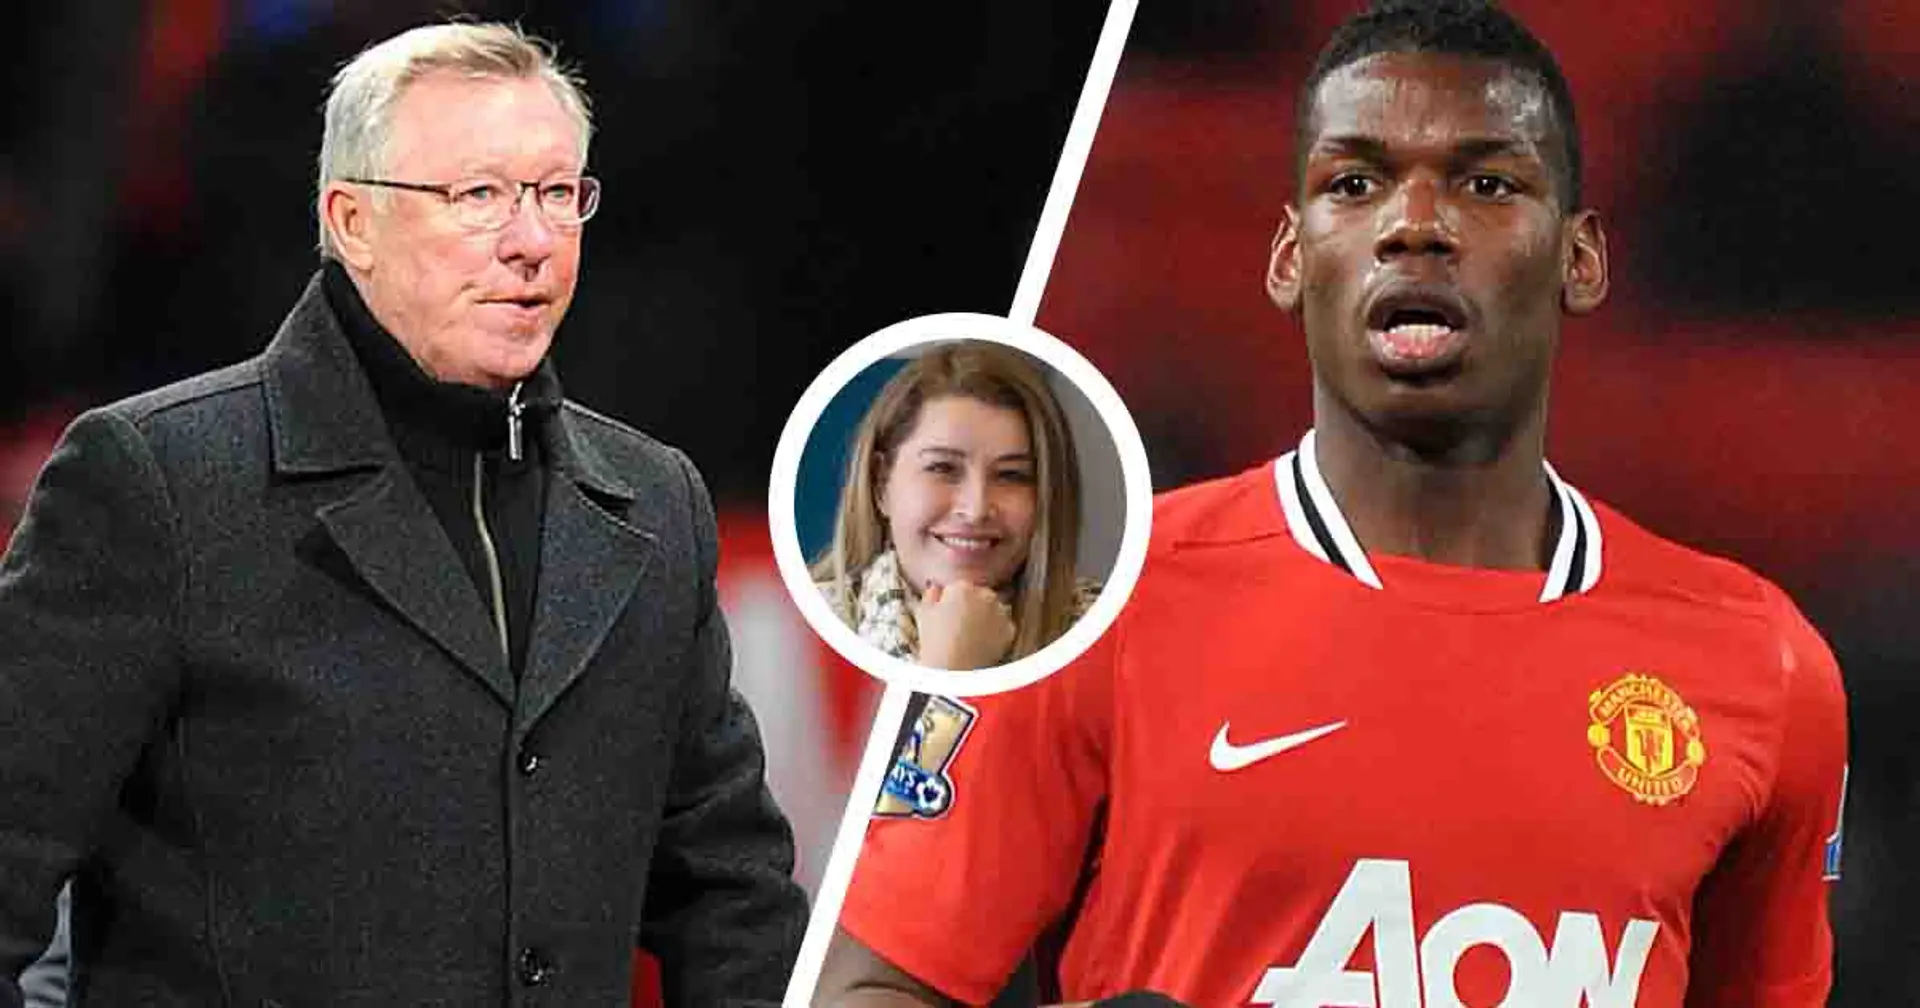 'He hit the table and our tea spilled': Pogba's agent reveals intense meeting with Sir Alex before his 2012 exit